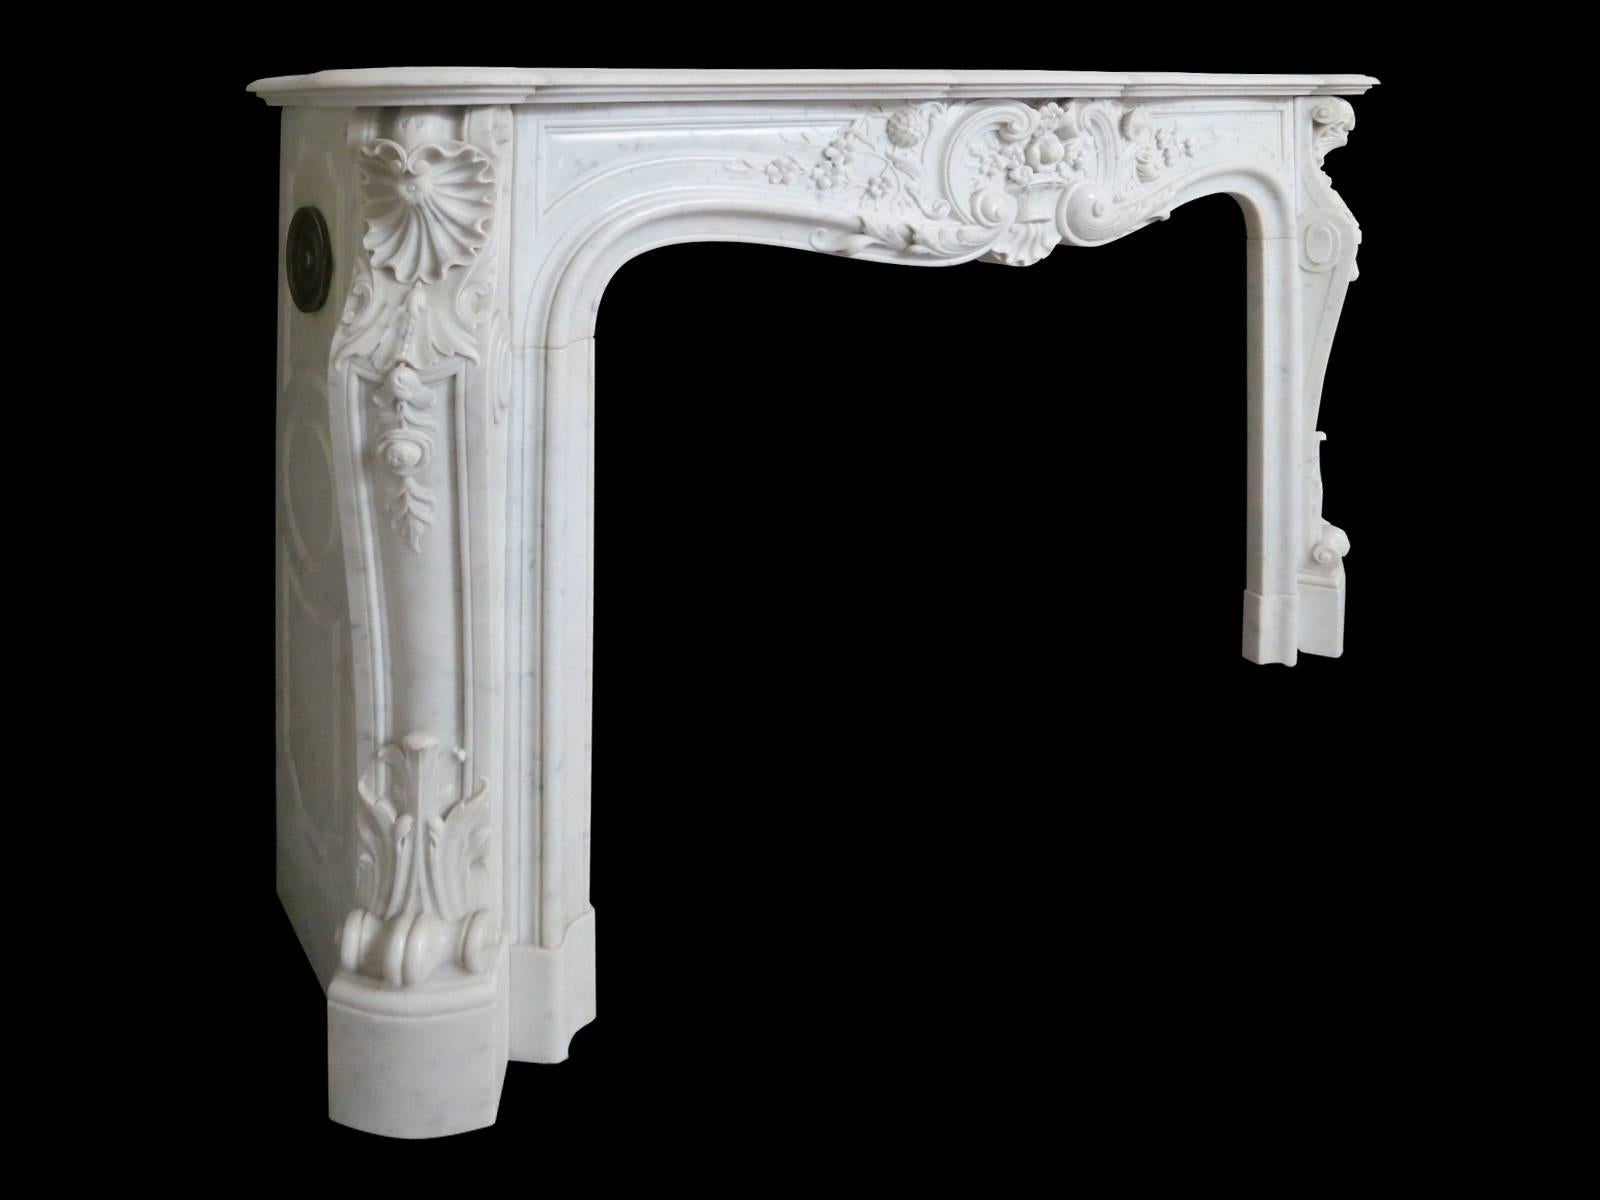 A well proportioned and finely carved Louis XV style fireplace in Italian Carrara marble. The carved panelled jambs with stiff acanthus at the bottom, descending flowers and foliage surmounted by C-scrolls and shells. The panelled side returns